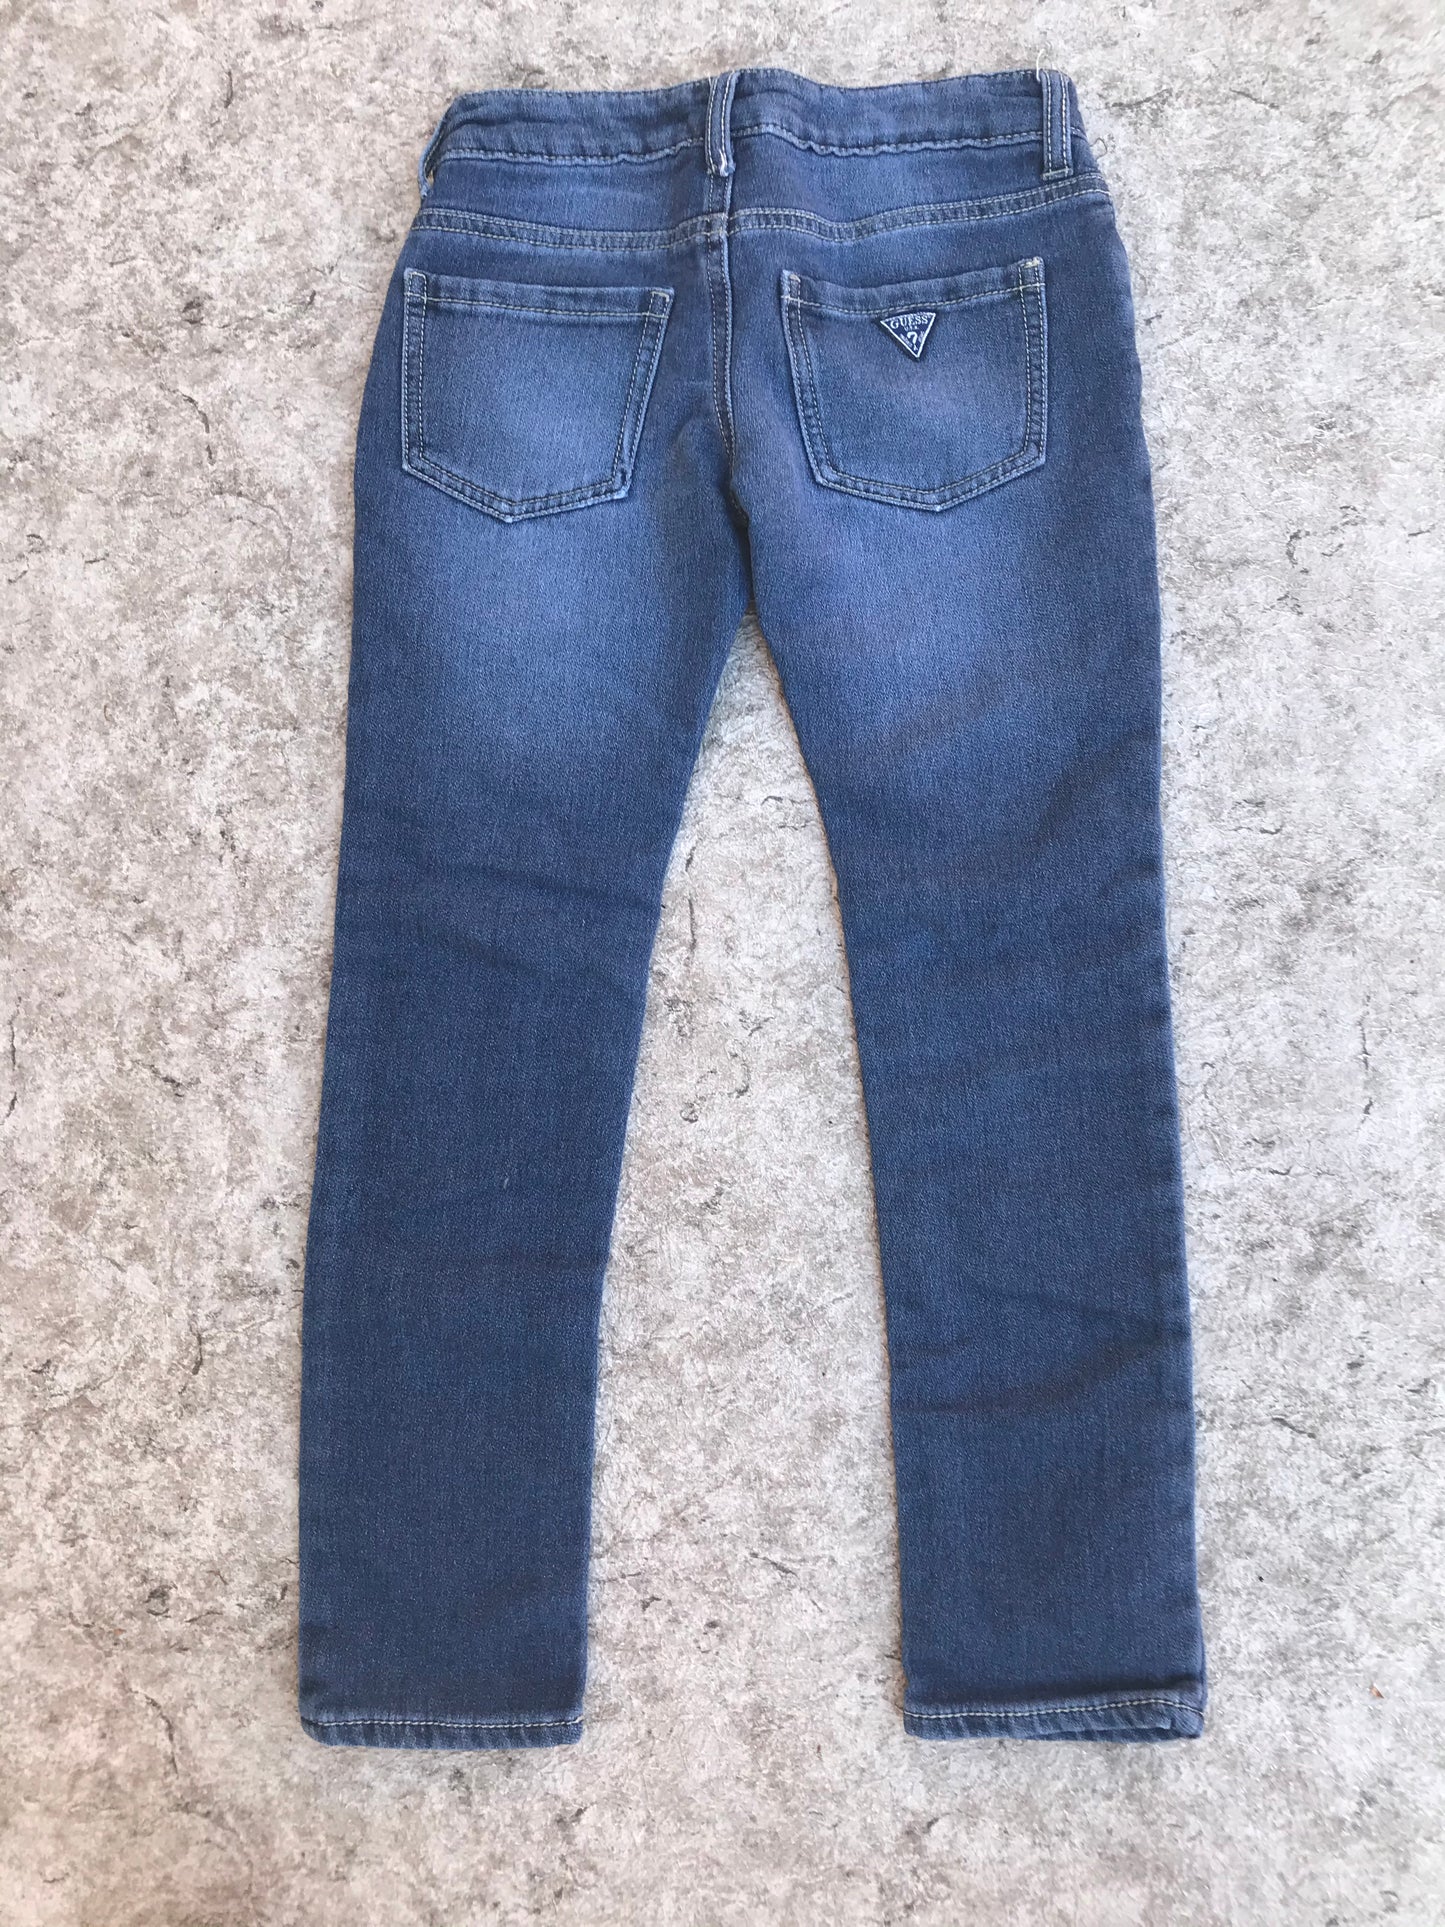 Pants Child Size 8 Guess Stretch Cotton Jeans Ultra Low As New